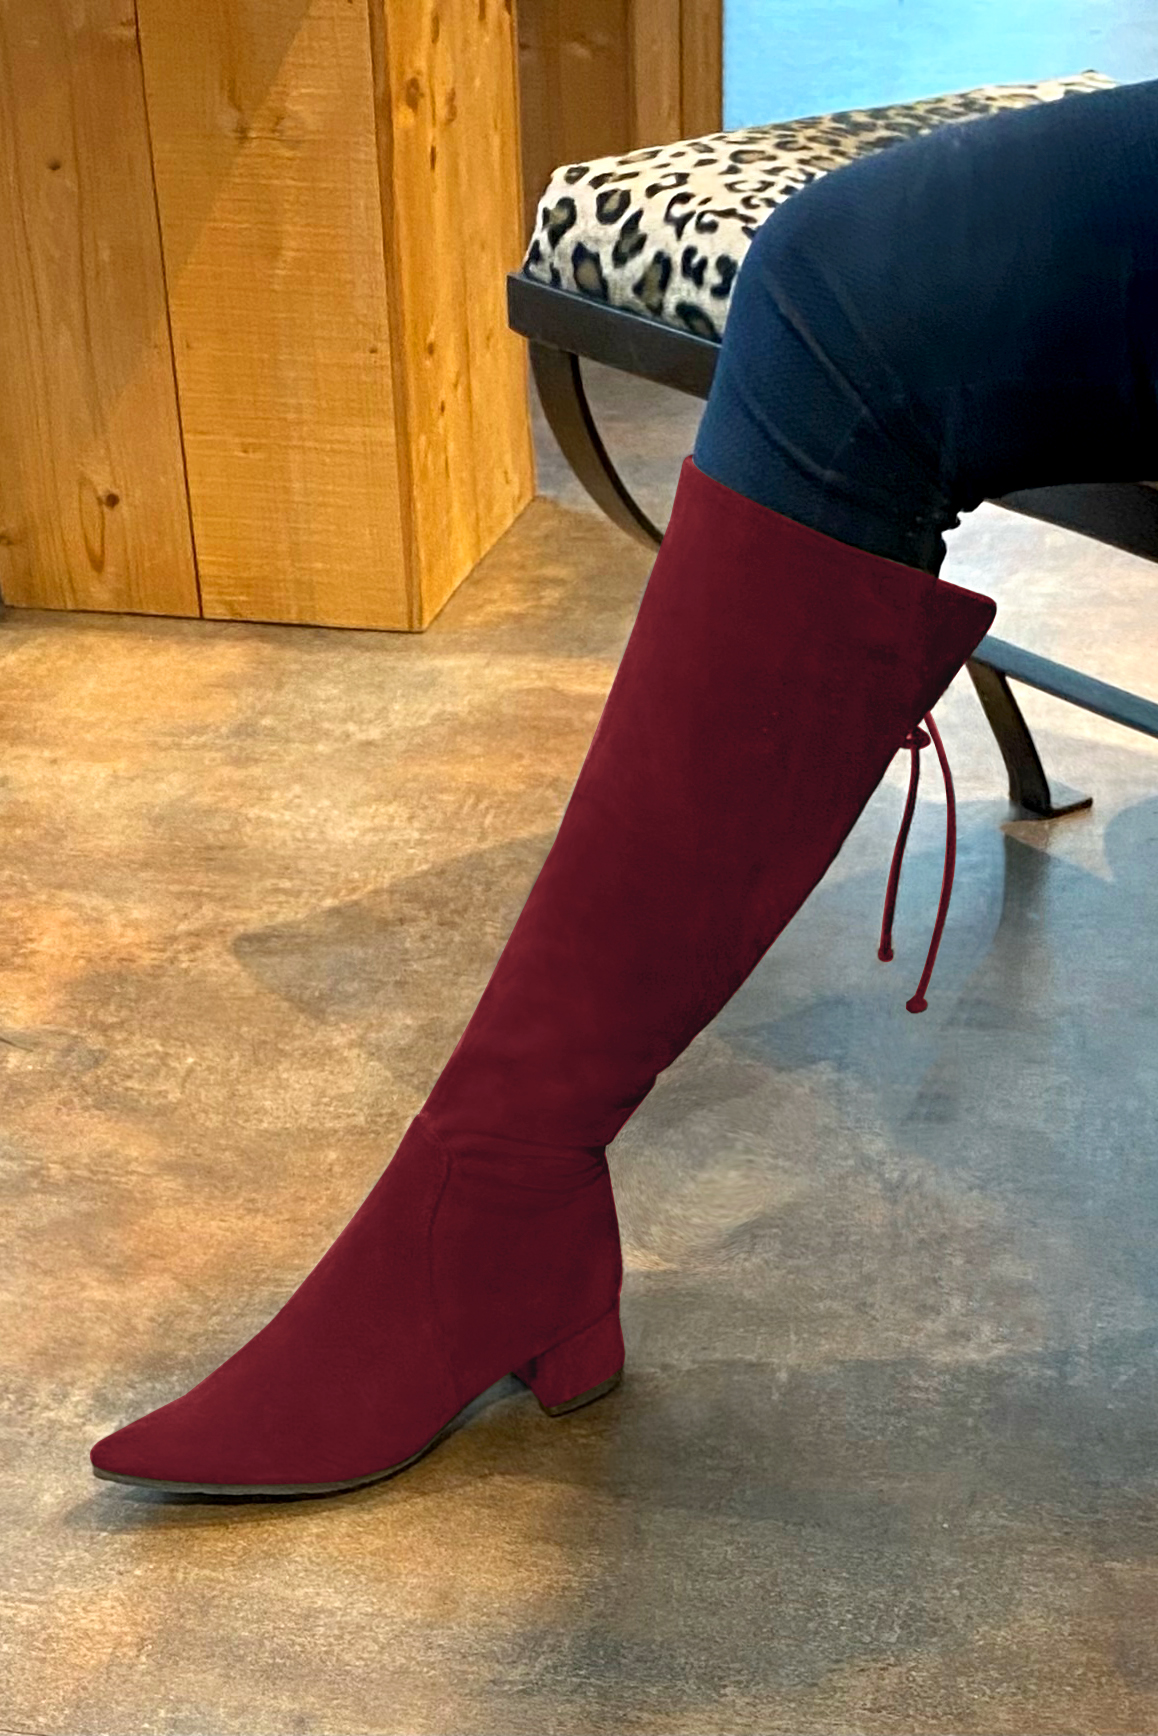 Burgundy red women's knee-high boots, with laces at the back. Tapered toe. Low flare heels. Made to measure. Worn view - Florence KOOIJMAN